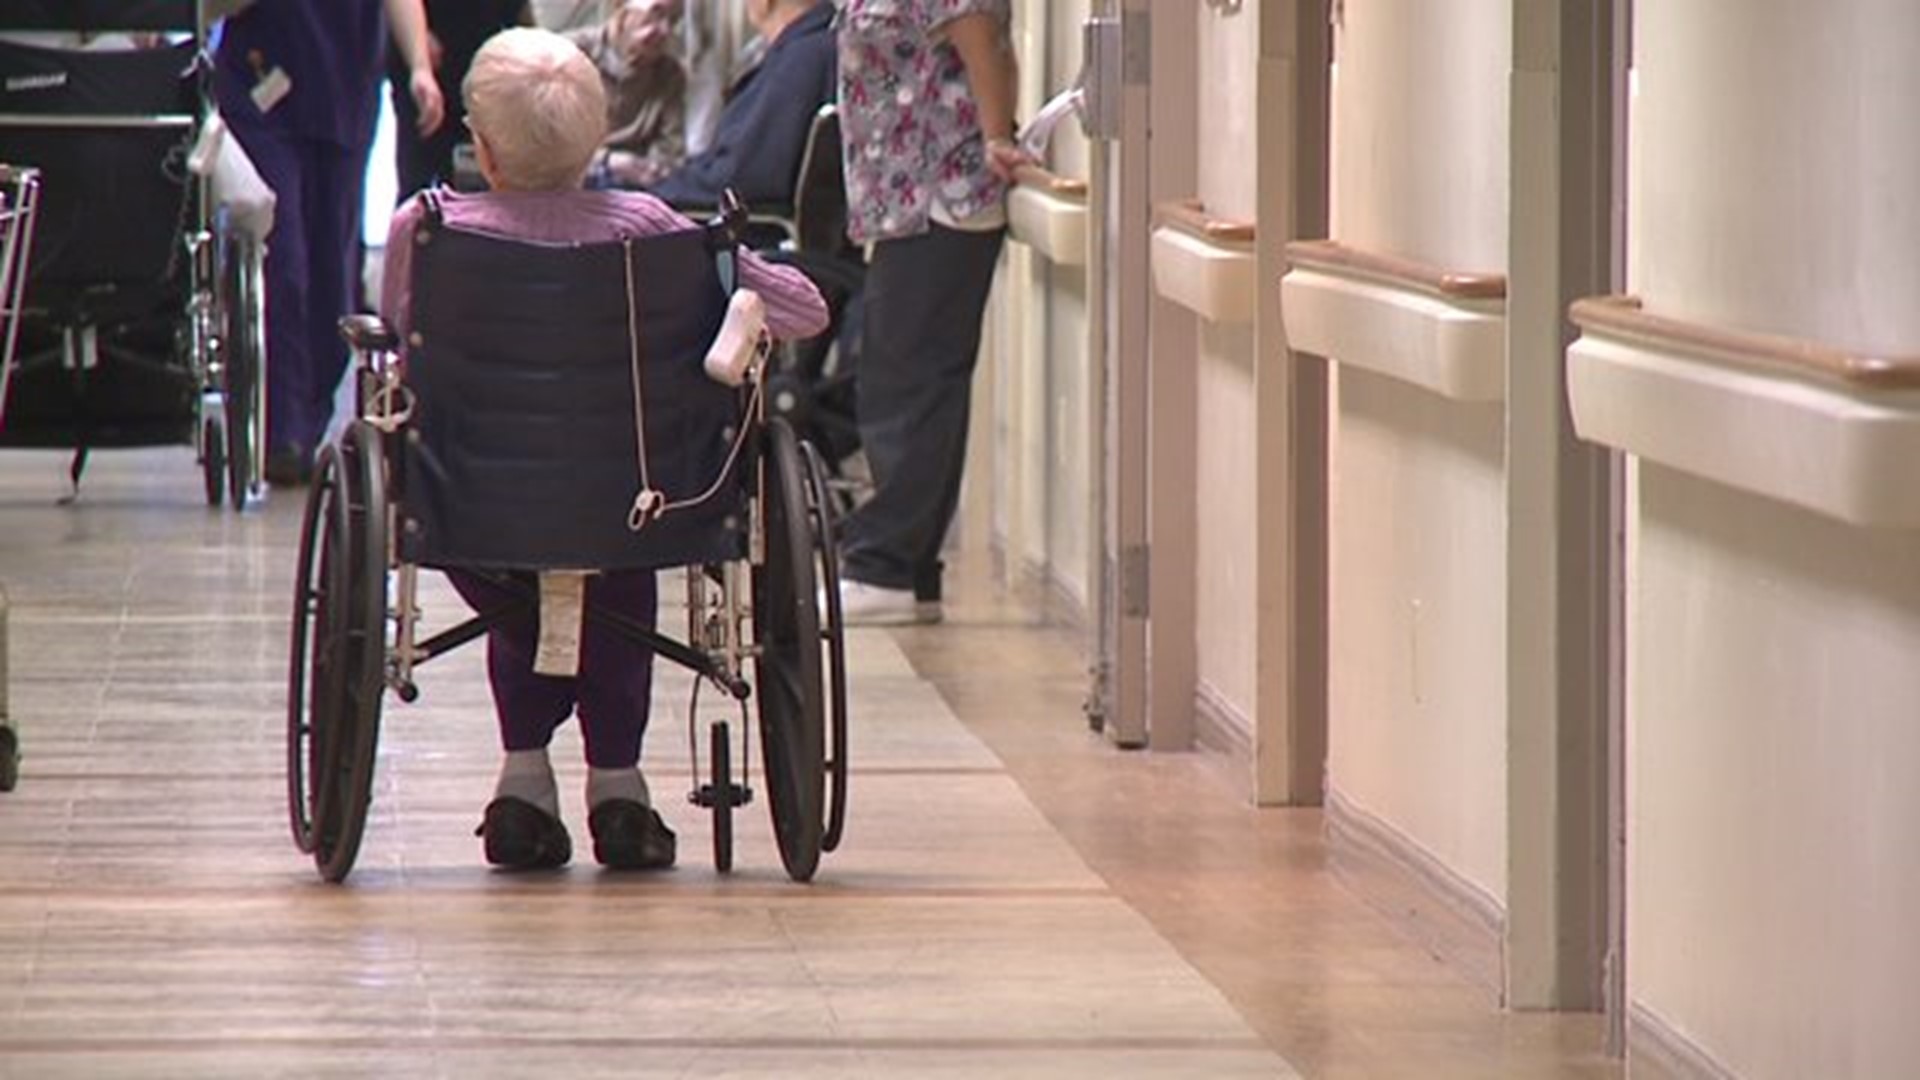 "Granny Cams" allowed in Illinois nursing homes